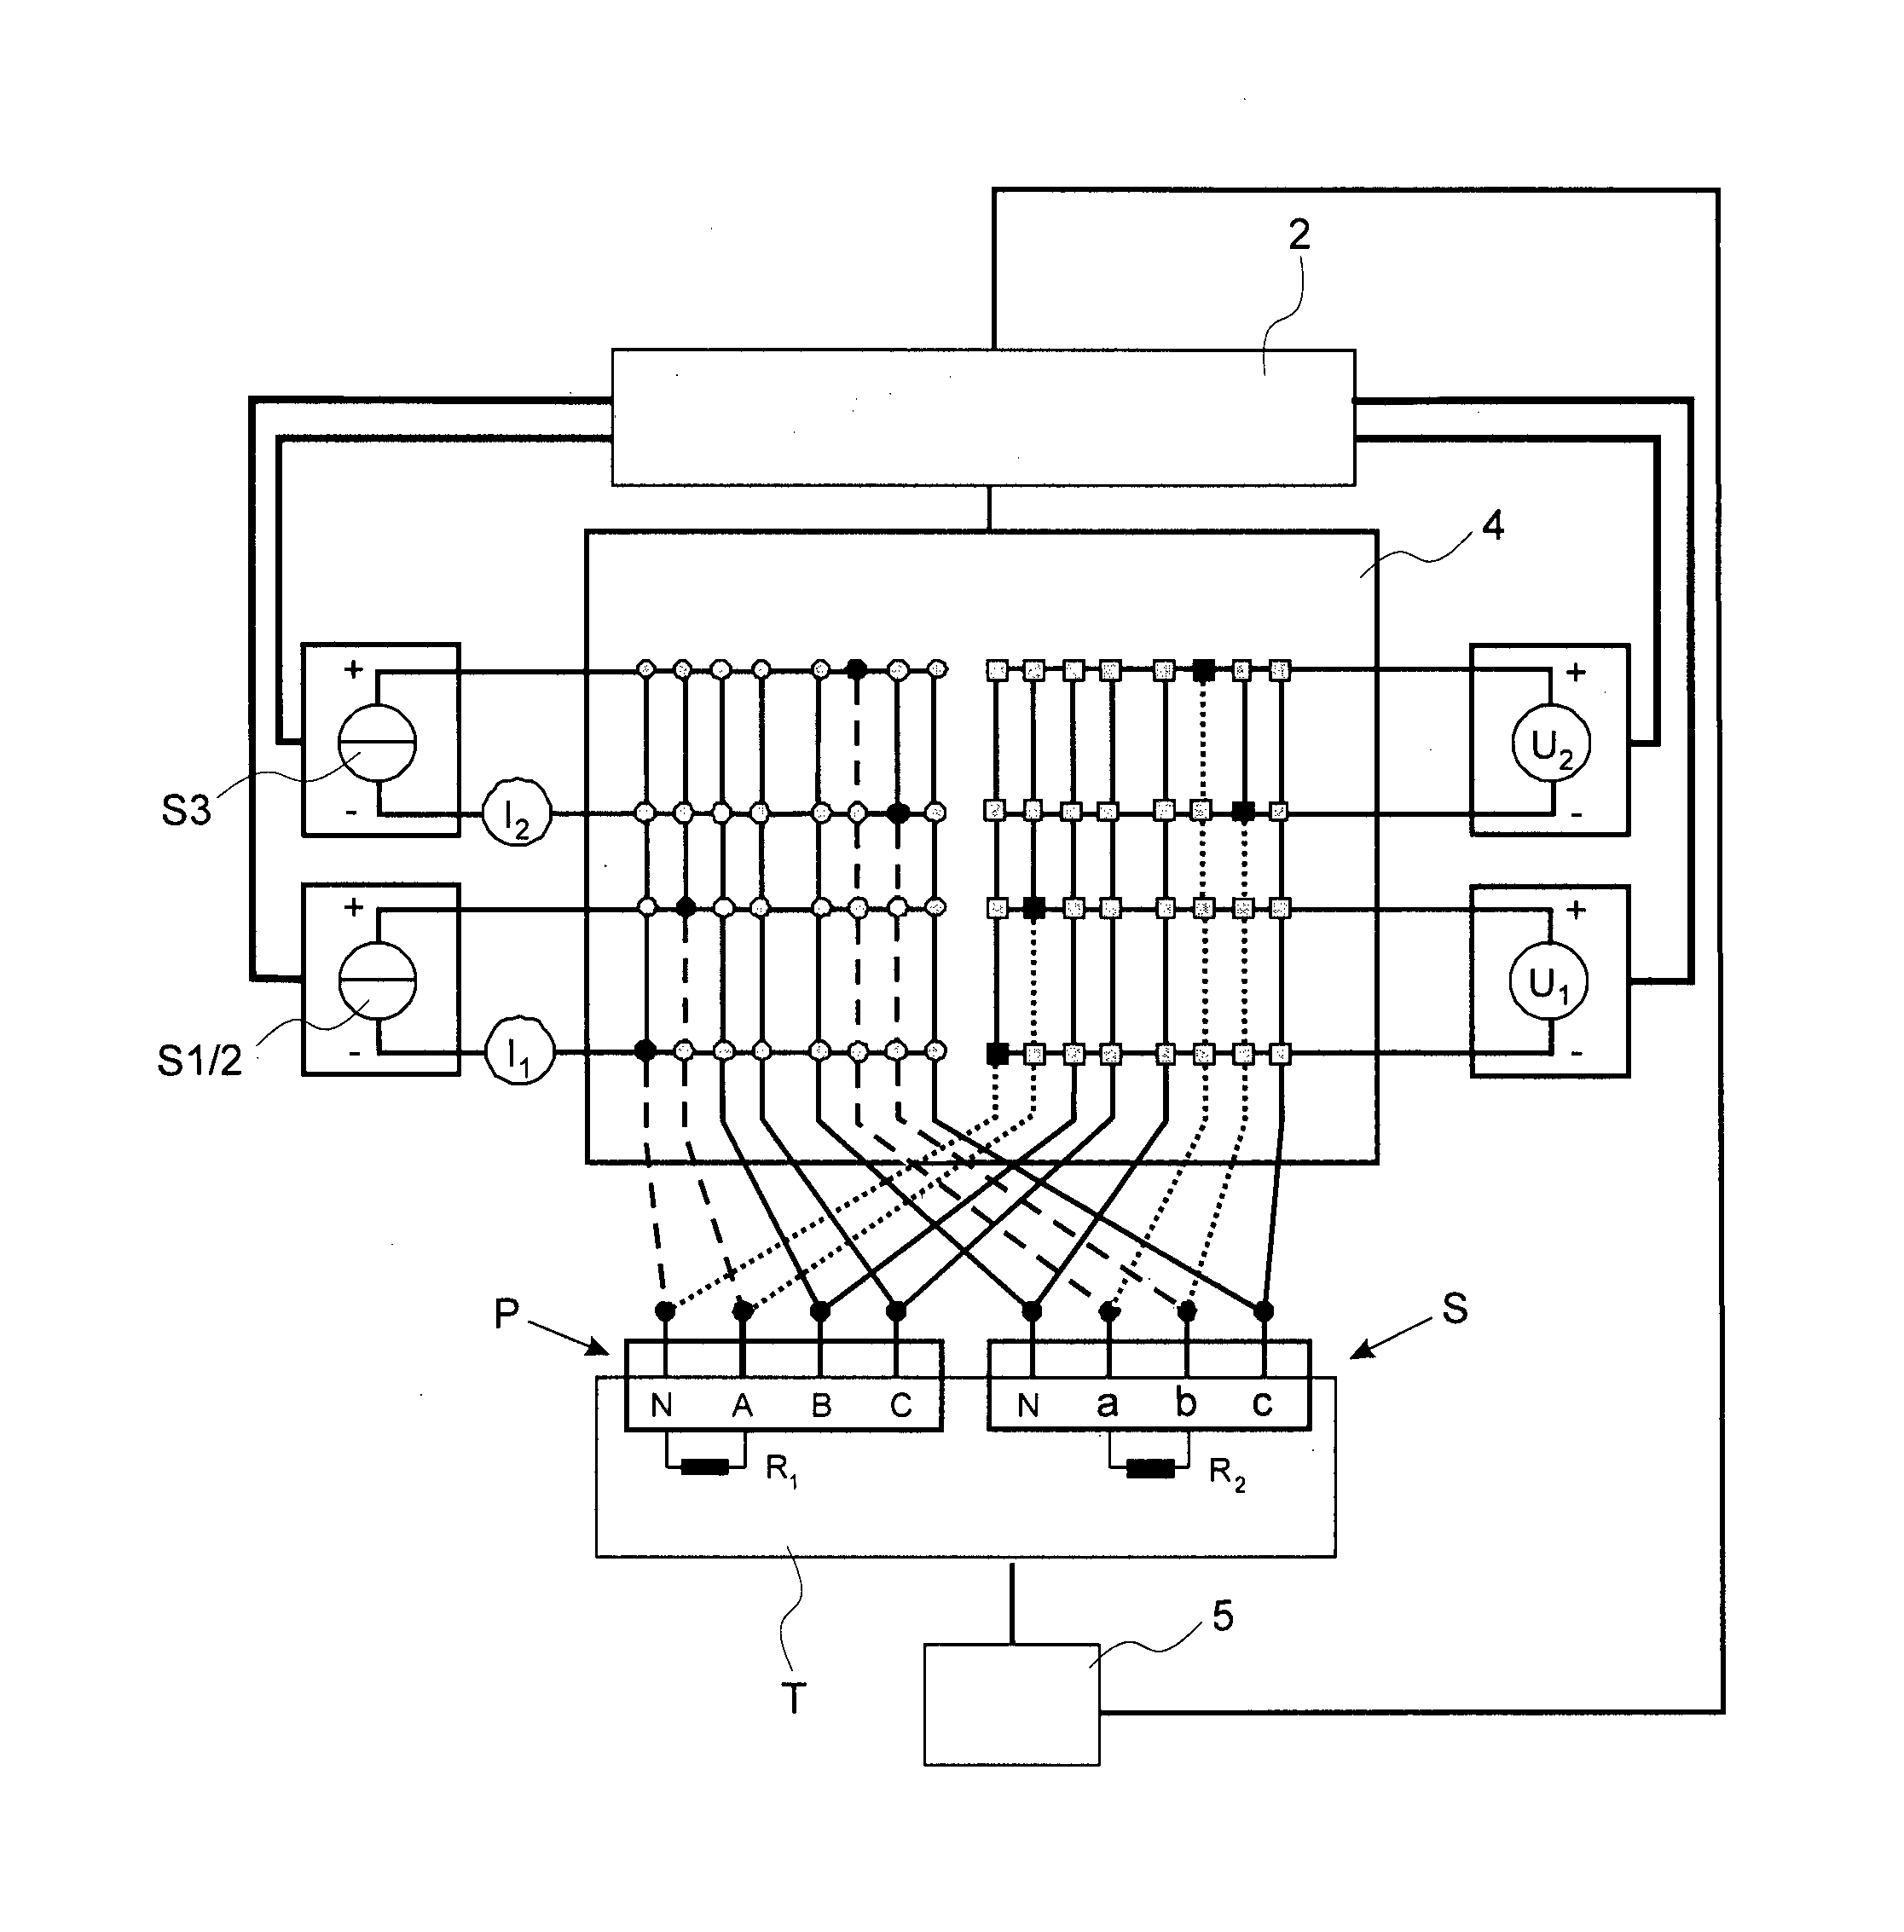 Apparatus and a method for testing winding resistances of transformers